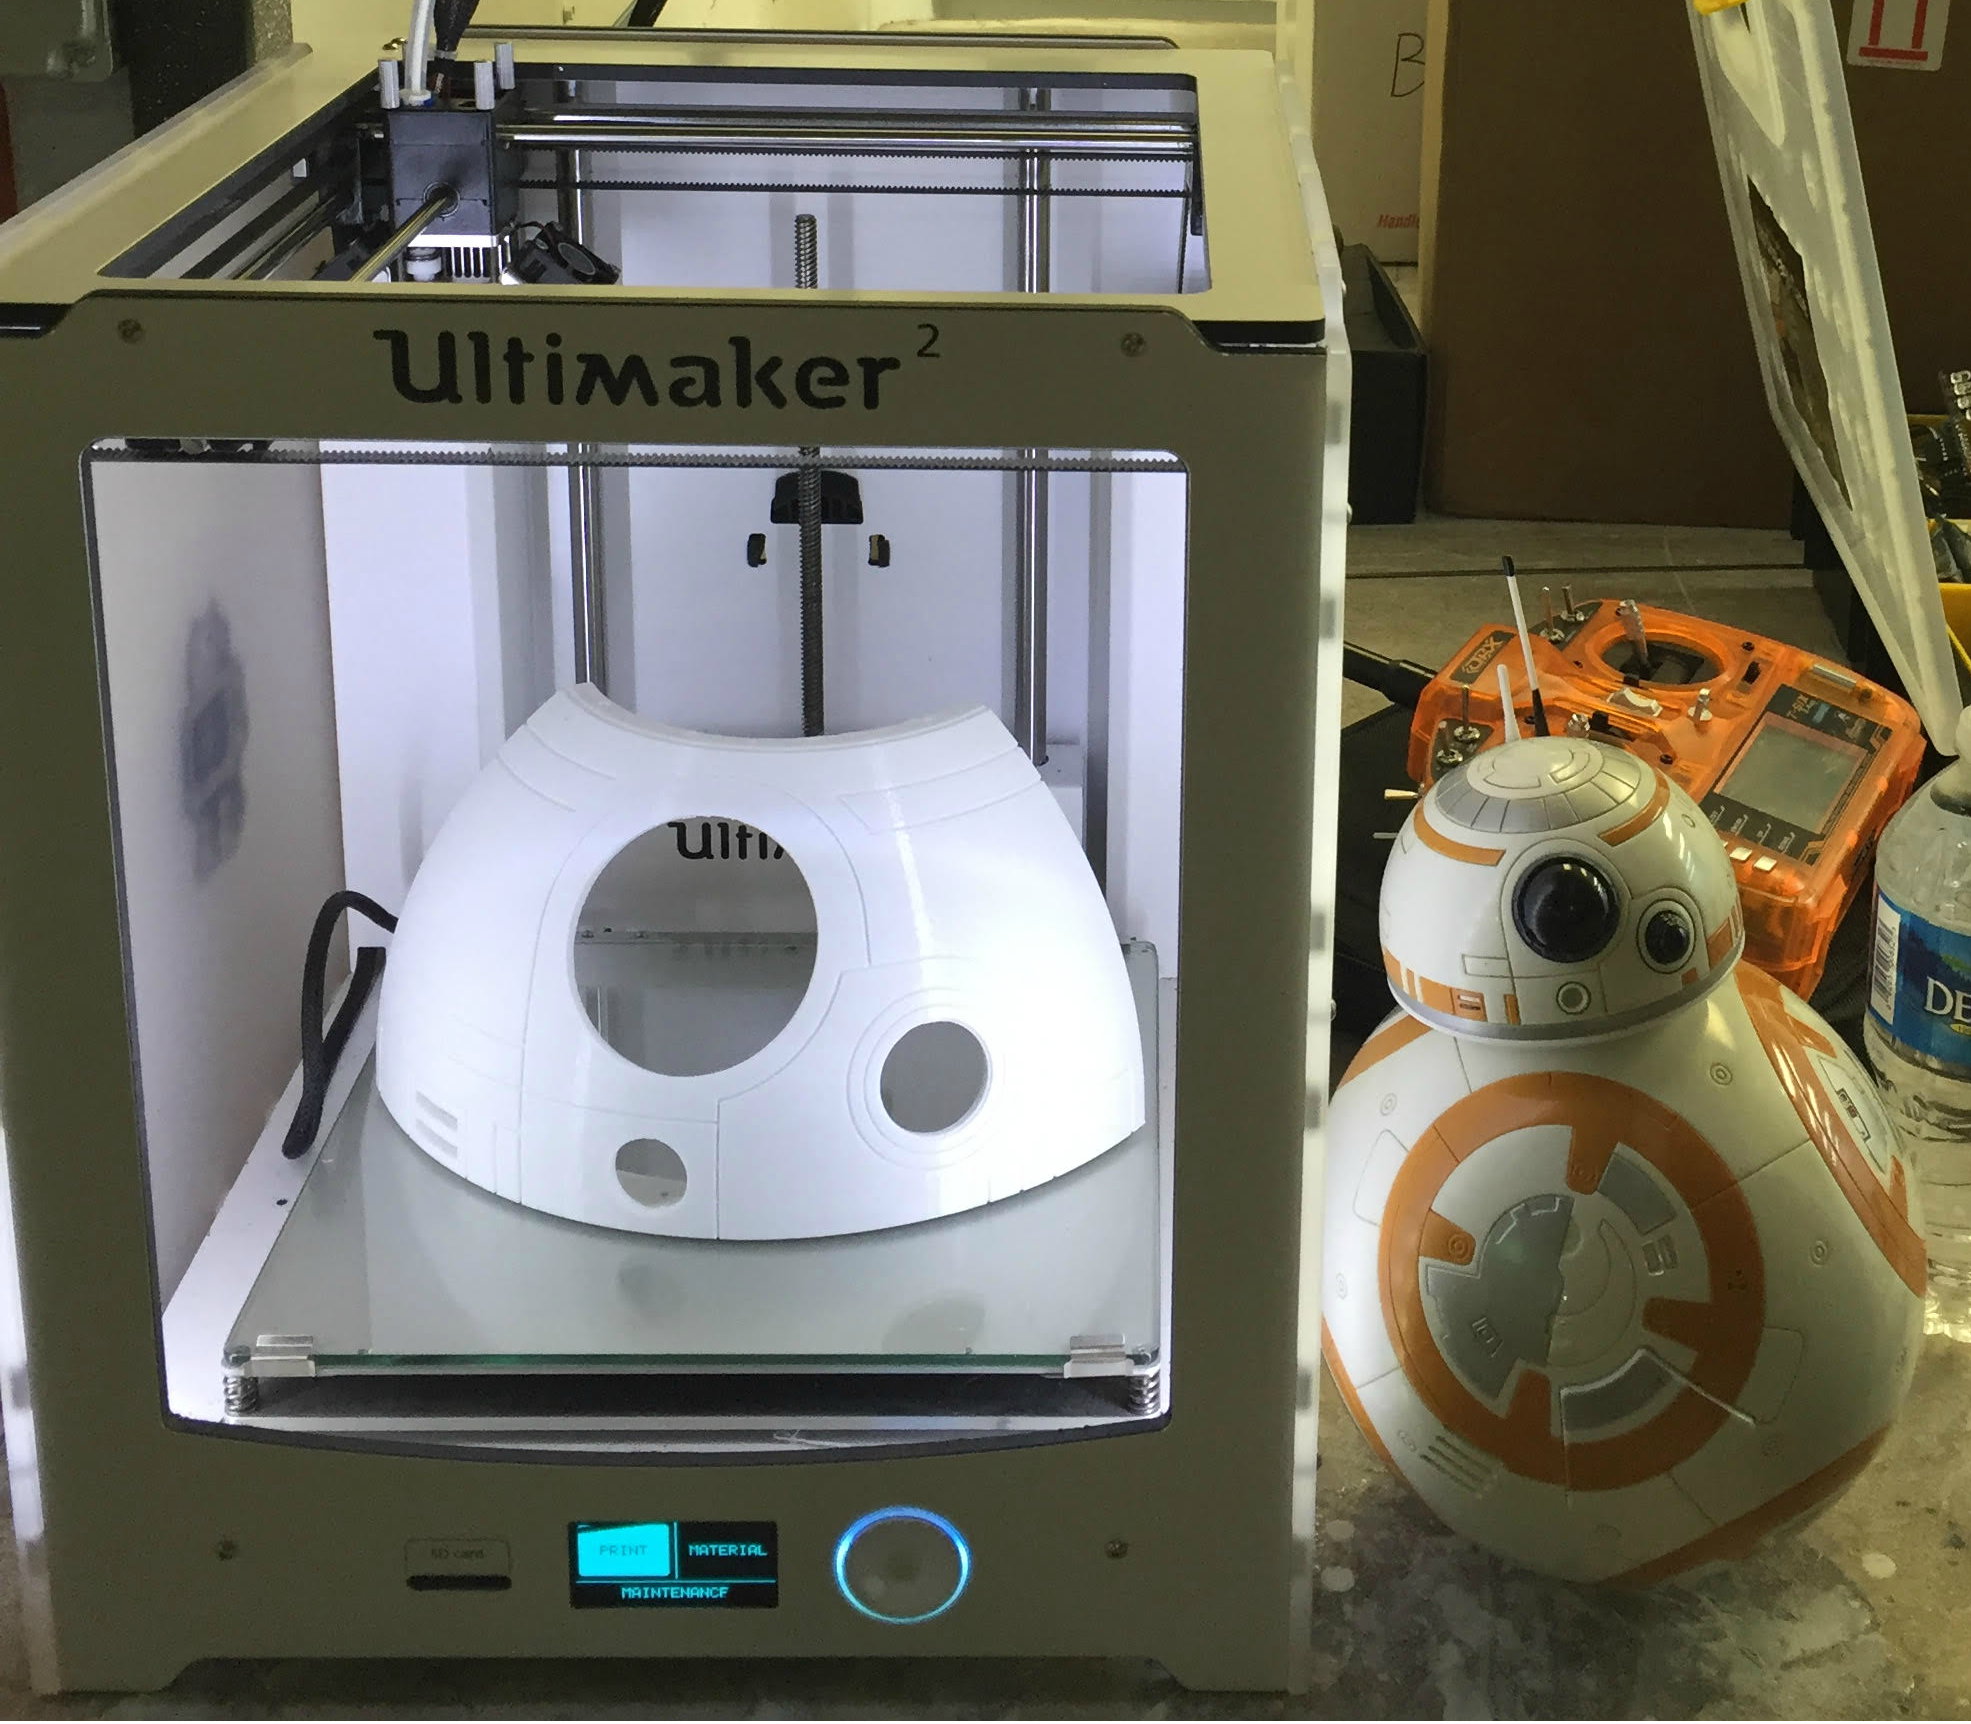 These the Droids You're Looking For: 3D Print the BB-8 Droid from The Force Awakens 3D Printing Industry